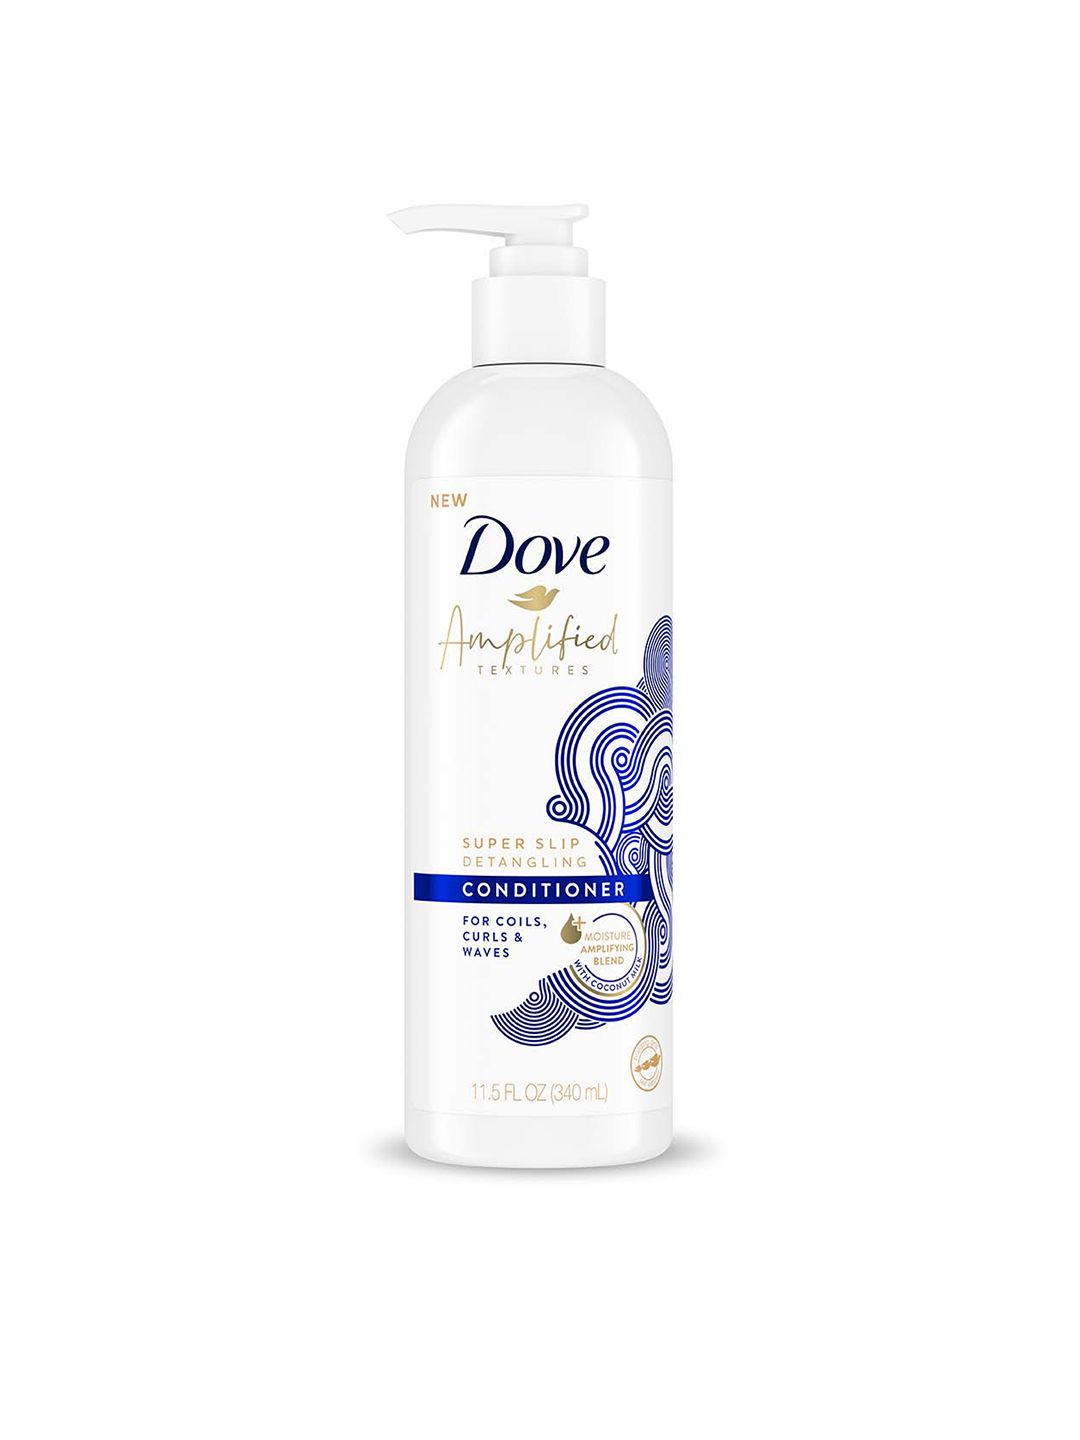 Dove Amplified Textures Super Slip Detangling Conditioner for Curly Hair - 340 ml Price in India